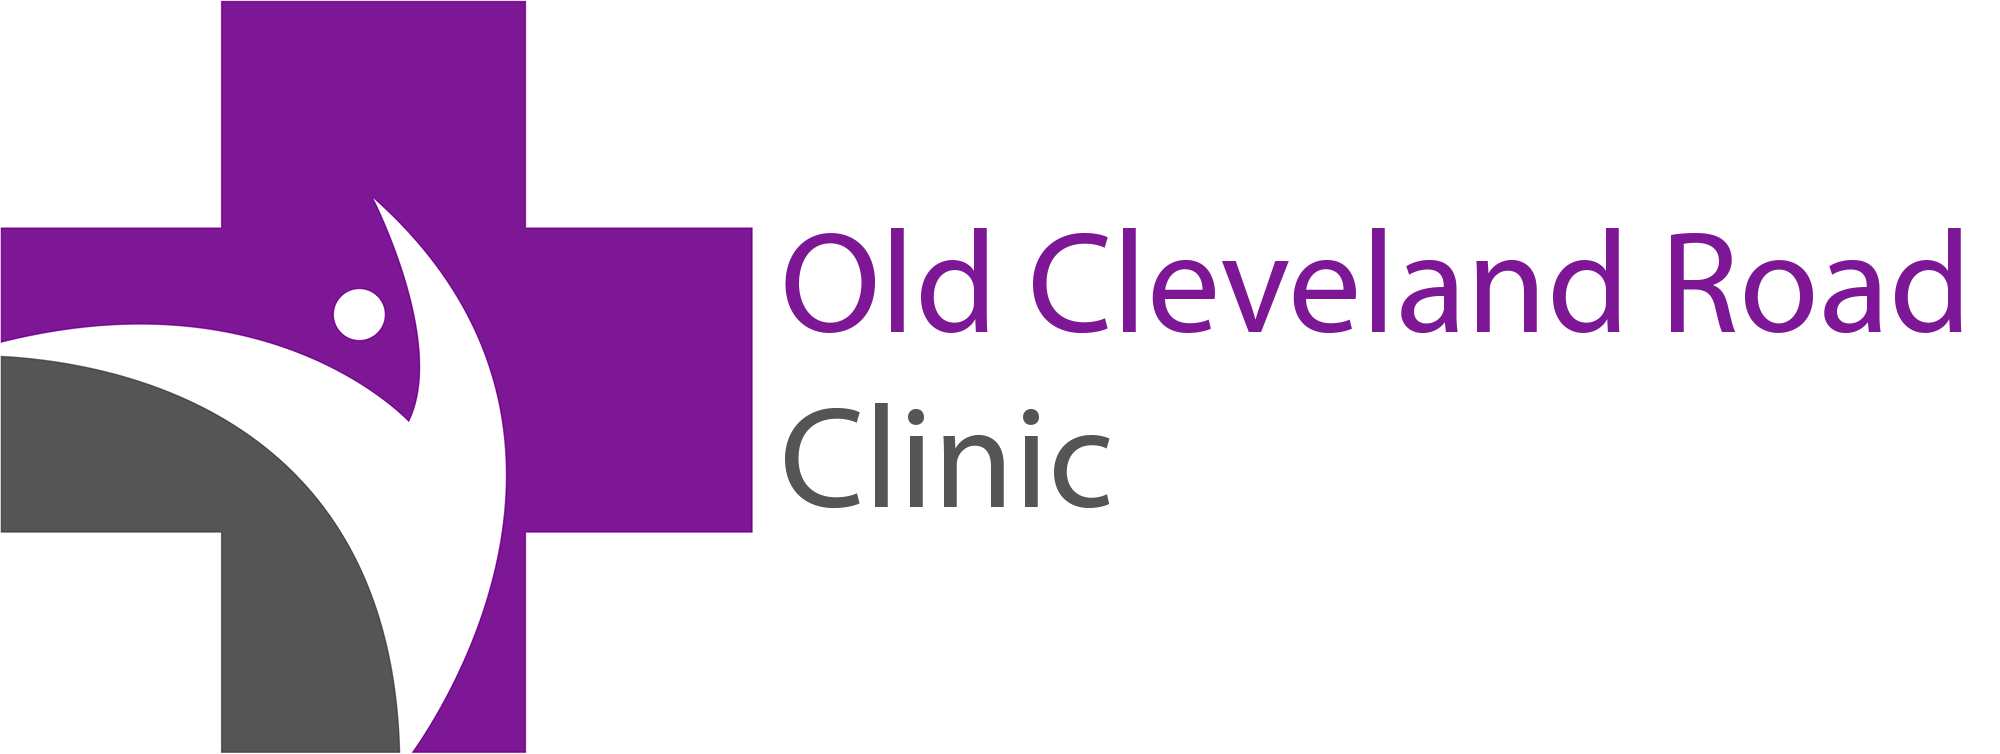 Old Cleveland Road Clinic Logo